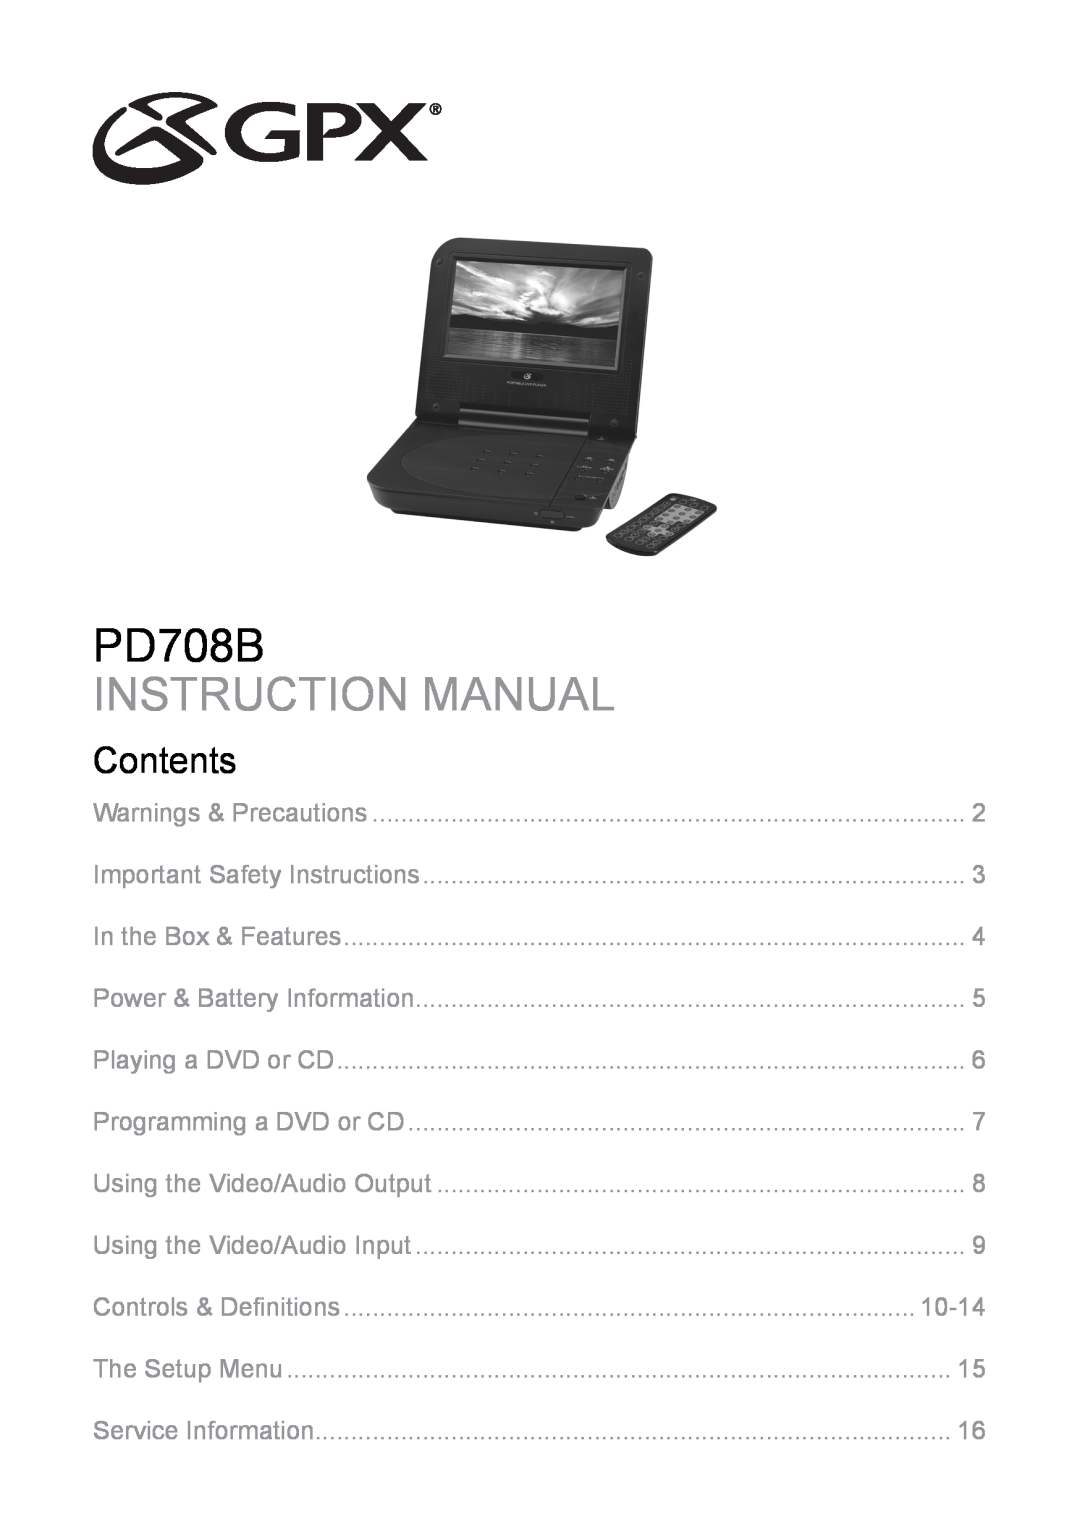 GPX PD708B important safety instructions Contents, 10-14 